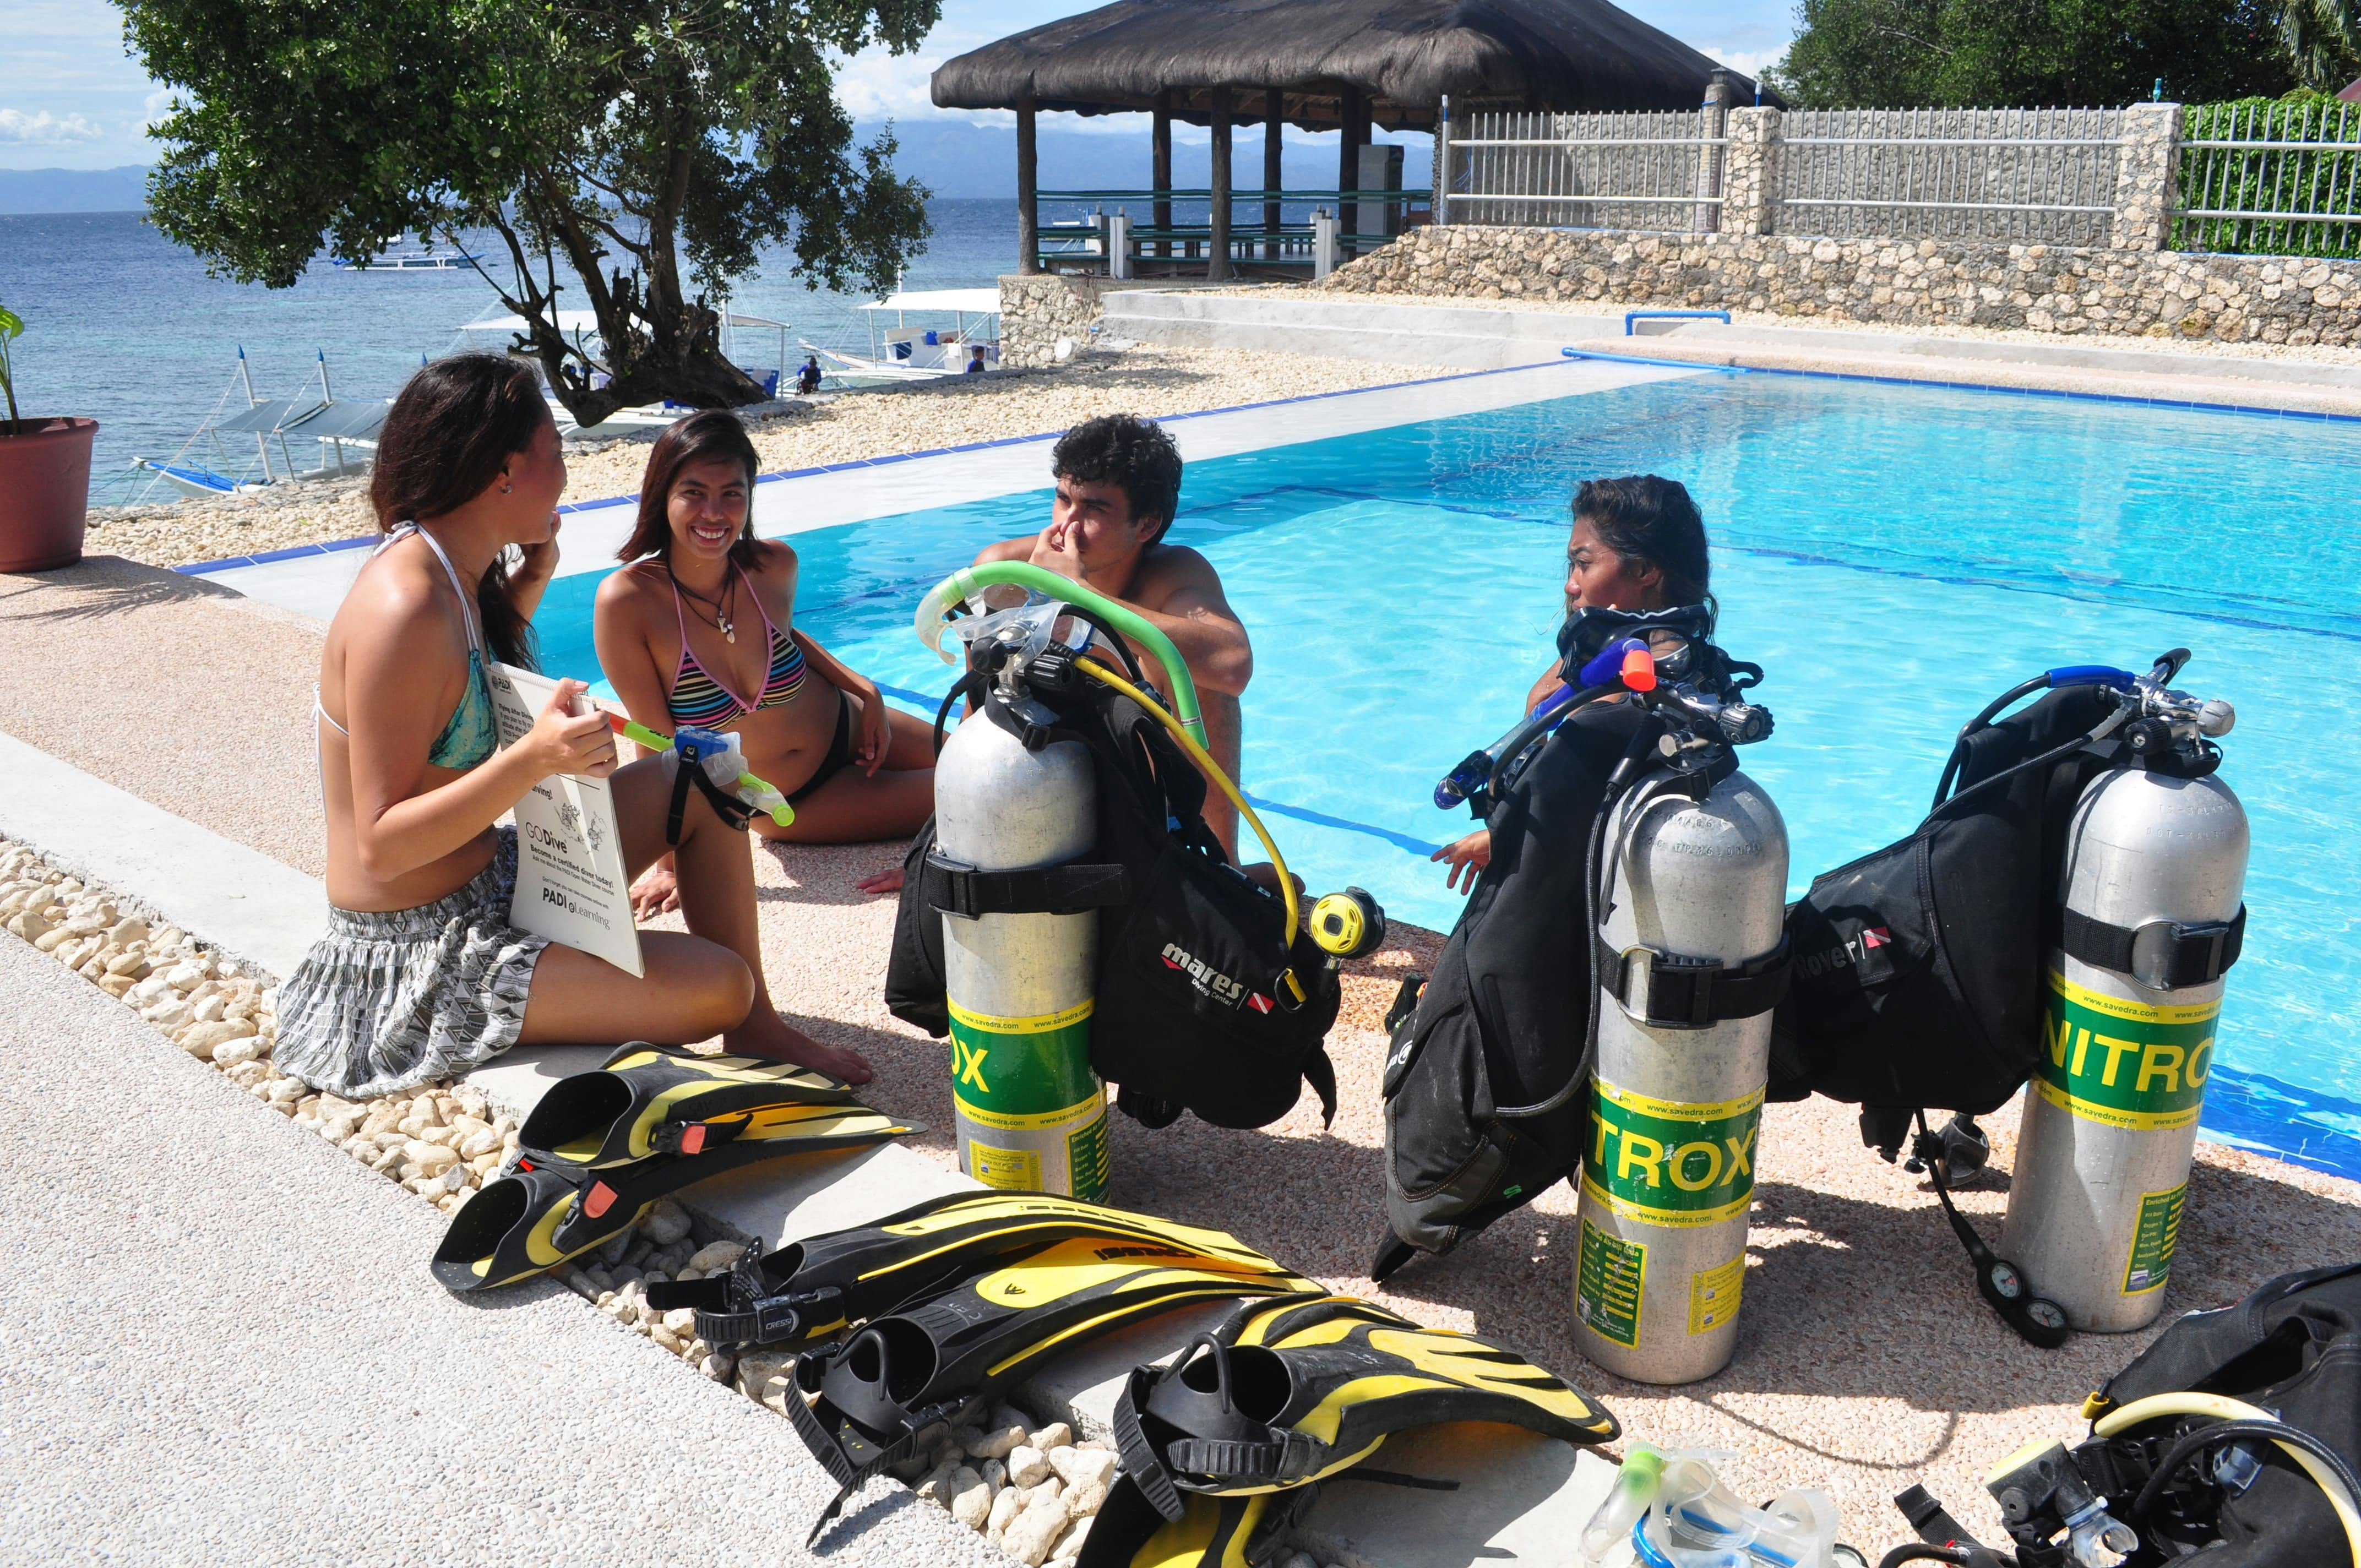 Lecture session by an instructor from Cebu Seaview Dive Resort